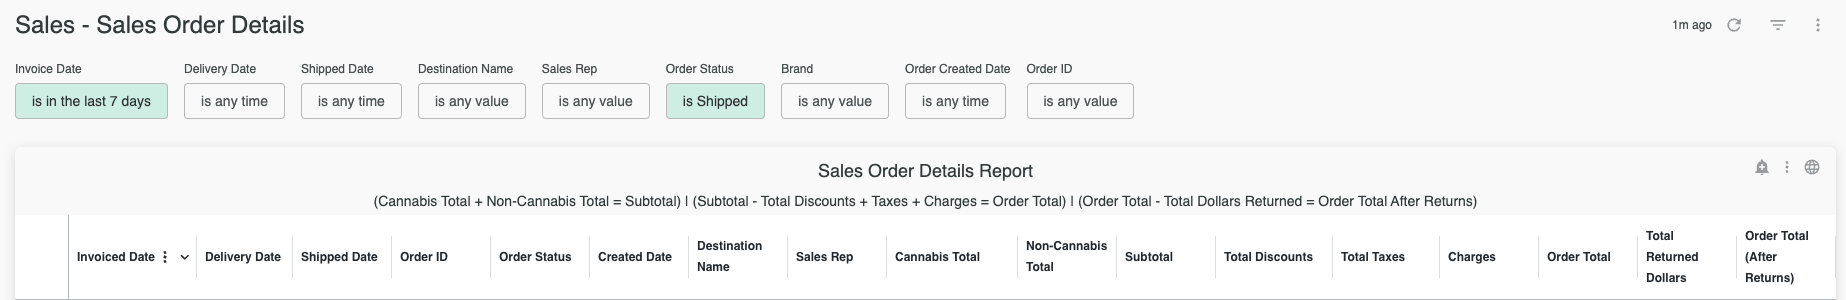 The "Sales Order Details" report has had its columns reorganized and description for the total calculations has been added.